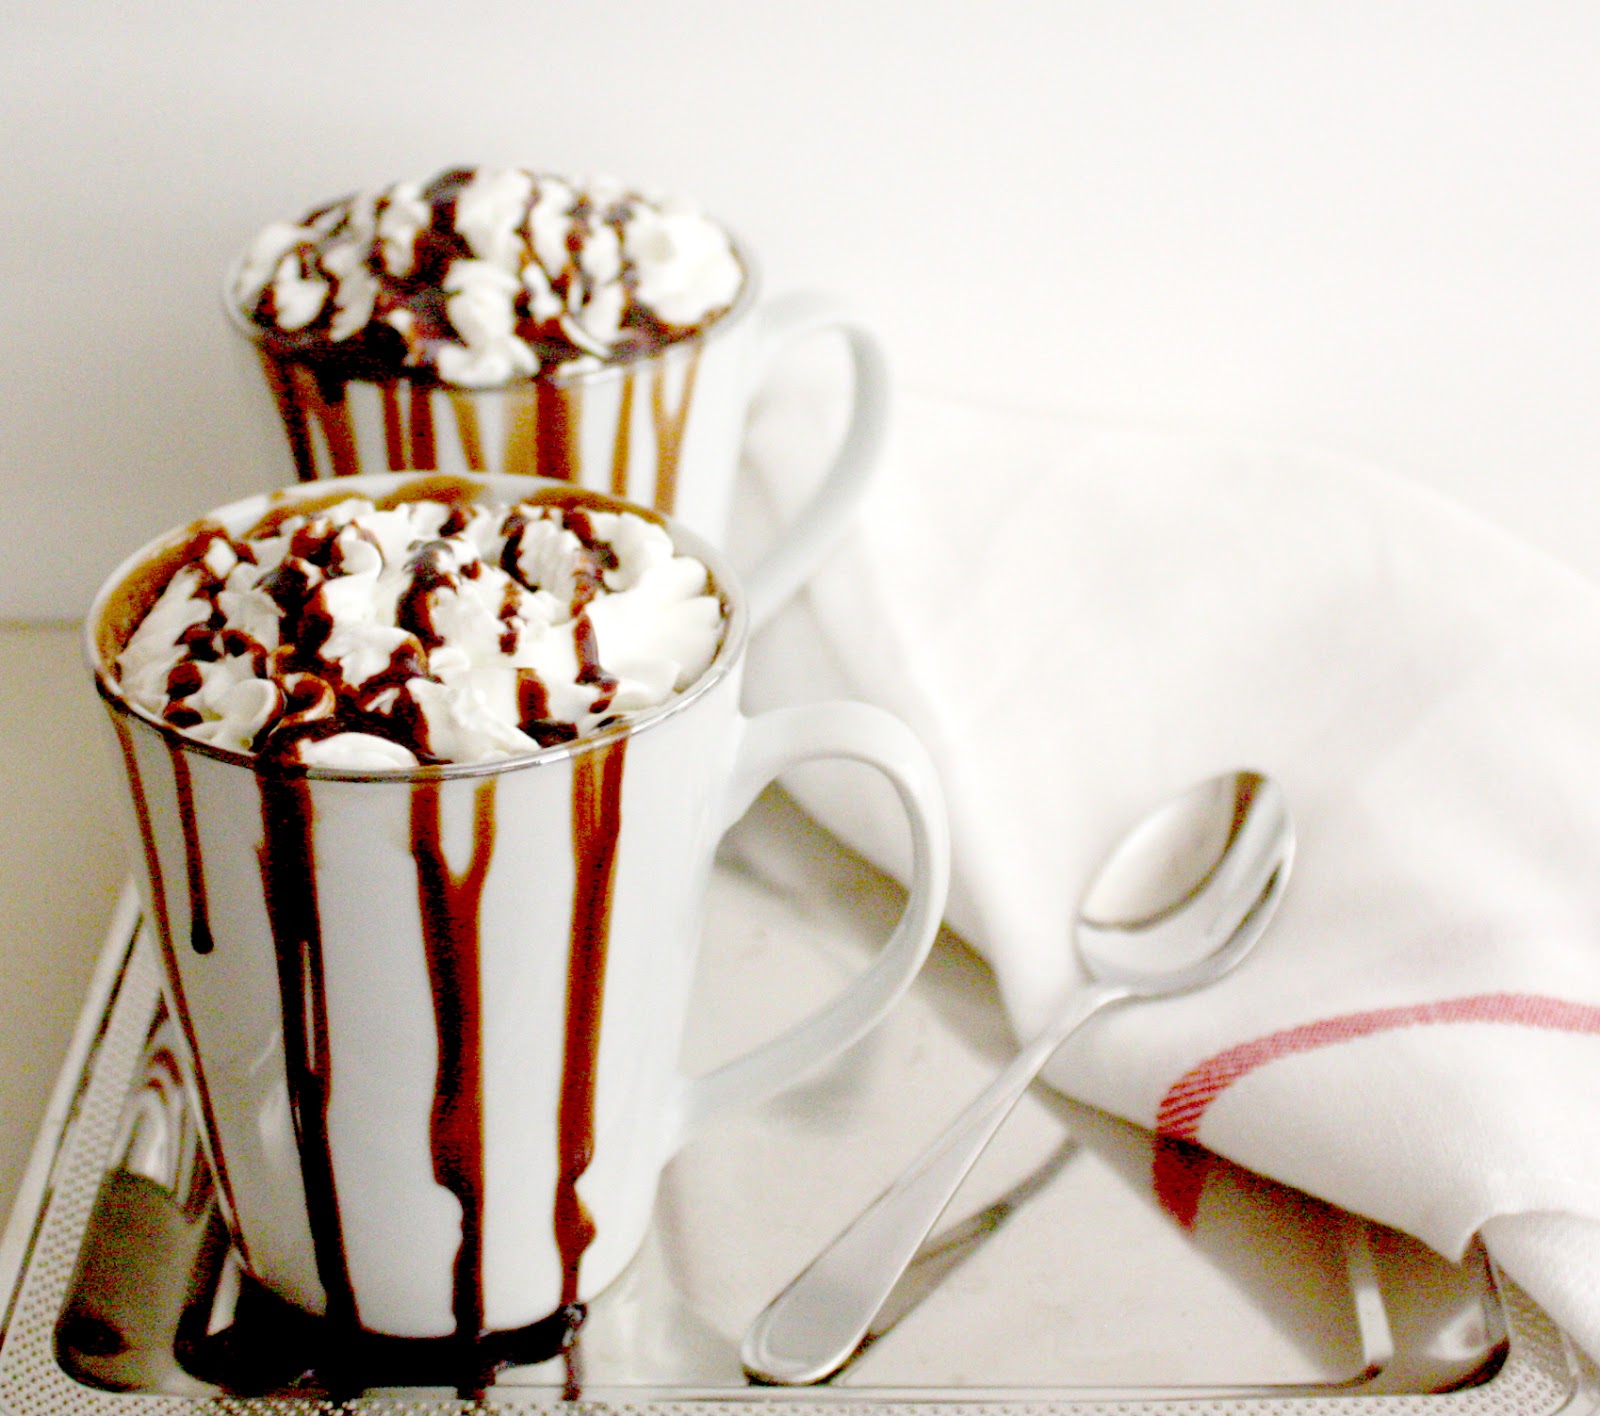 A hot cocoa bar with a vegan twist you won't want to miss. - Cribbs Style